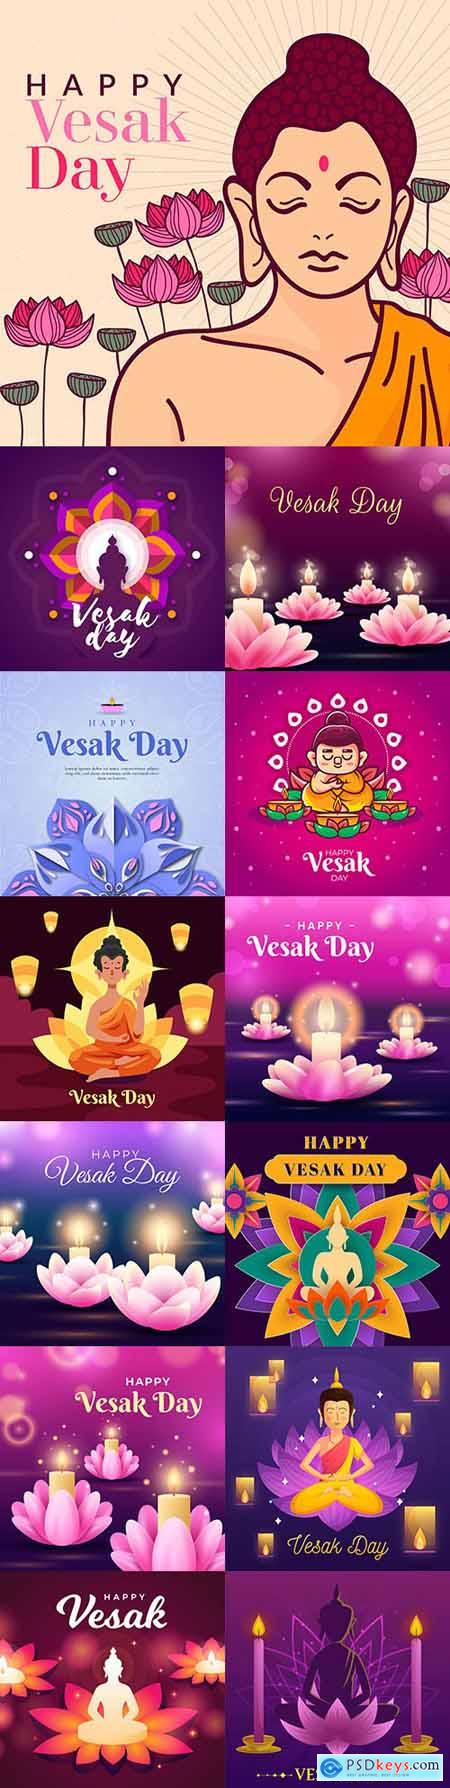 Vesak day festive illustration with flowers and candles